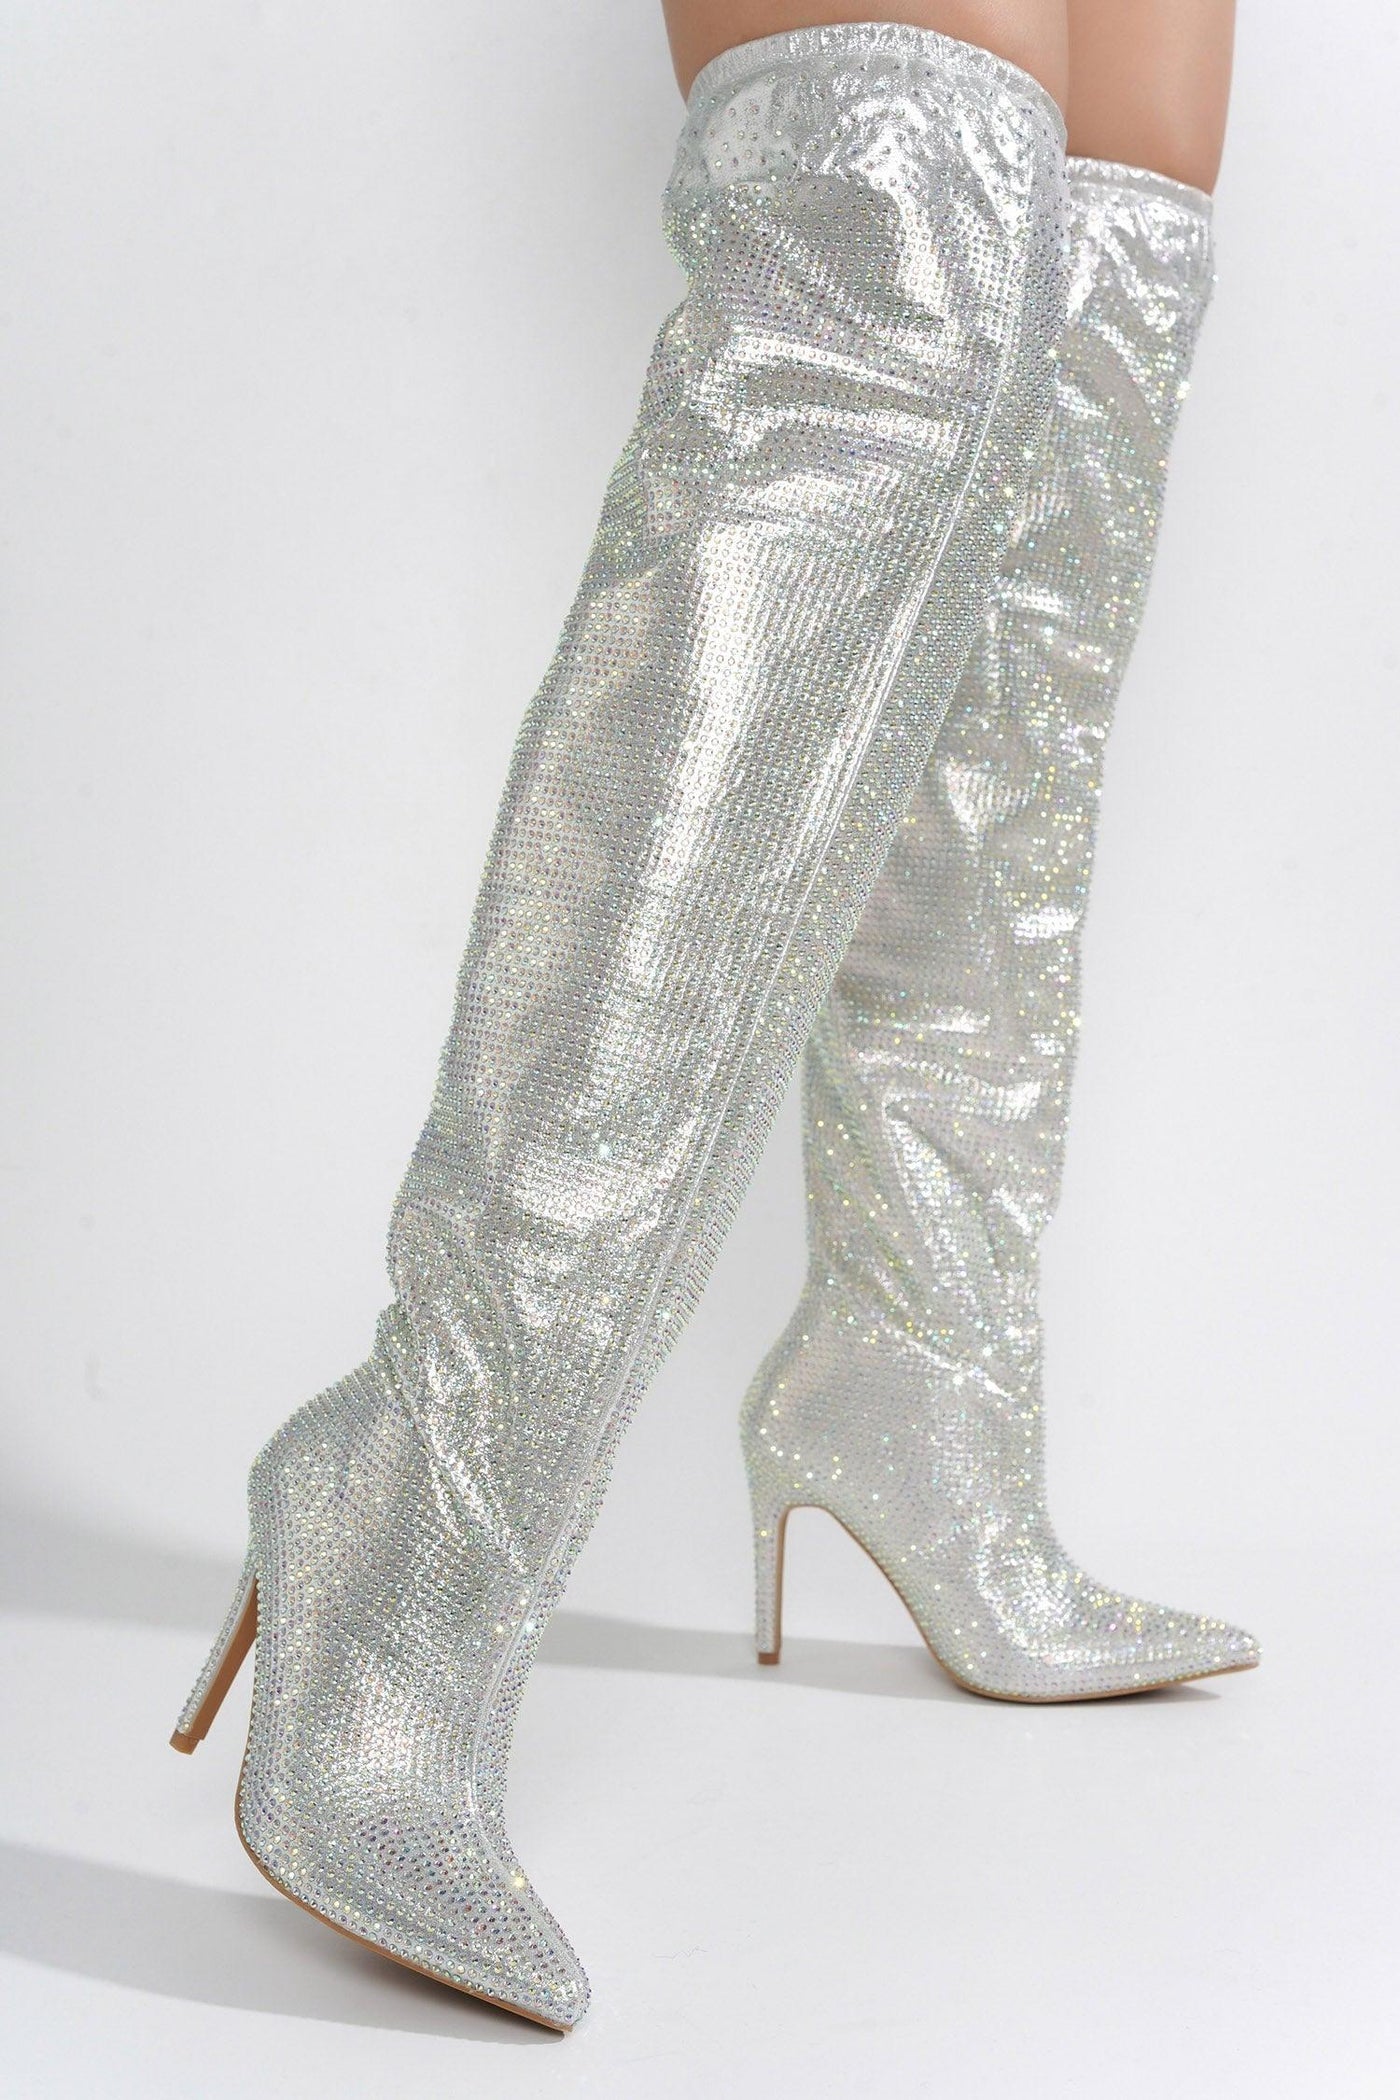 HELOMA - SILVER Thigh High Boots